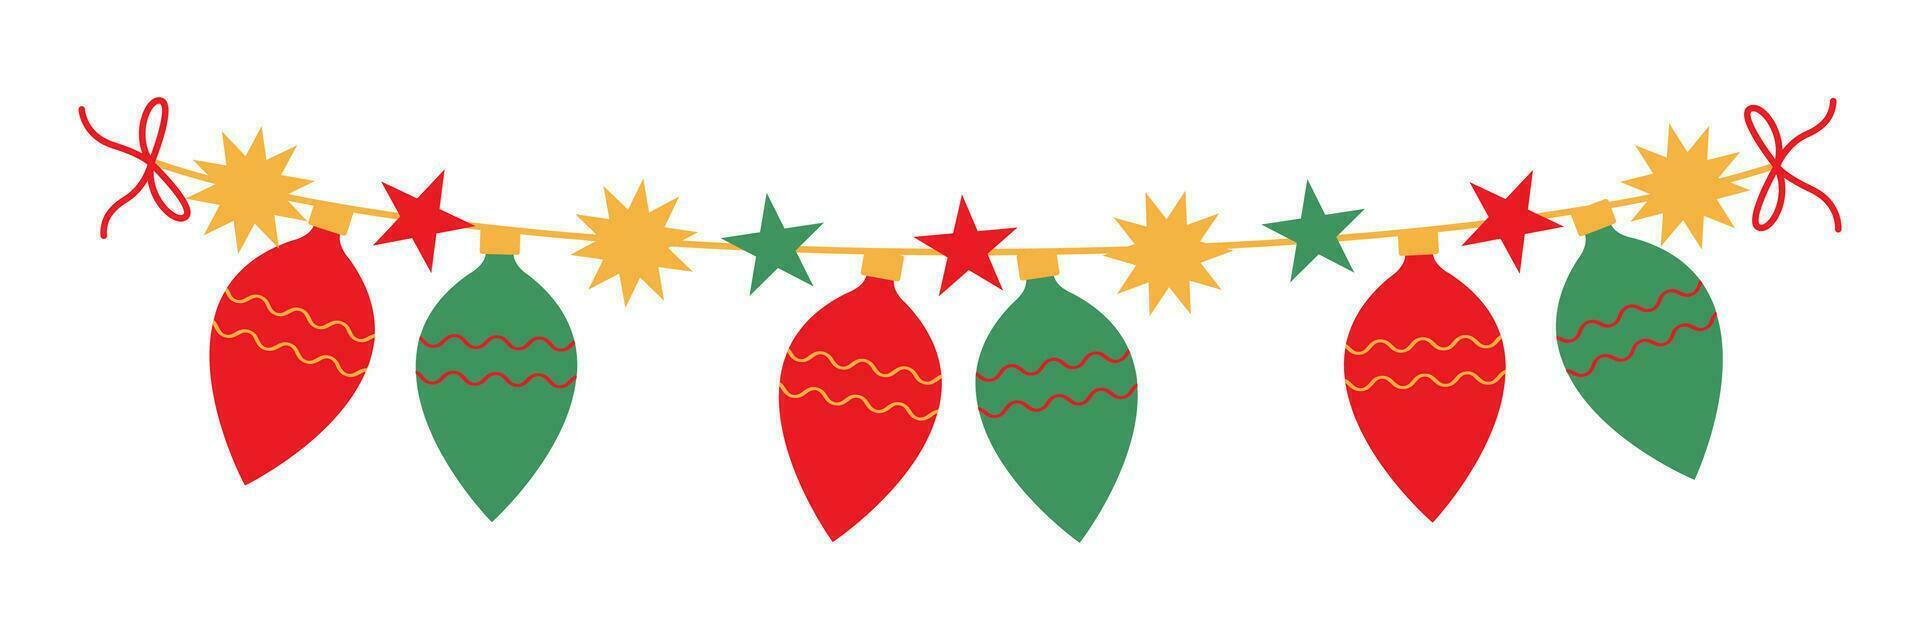 Christmas lights, party flags, and toy decorations. Vector illustration flat Happy New Year.